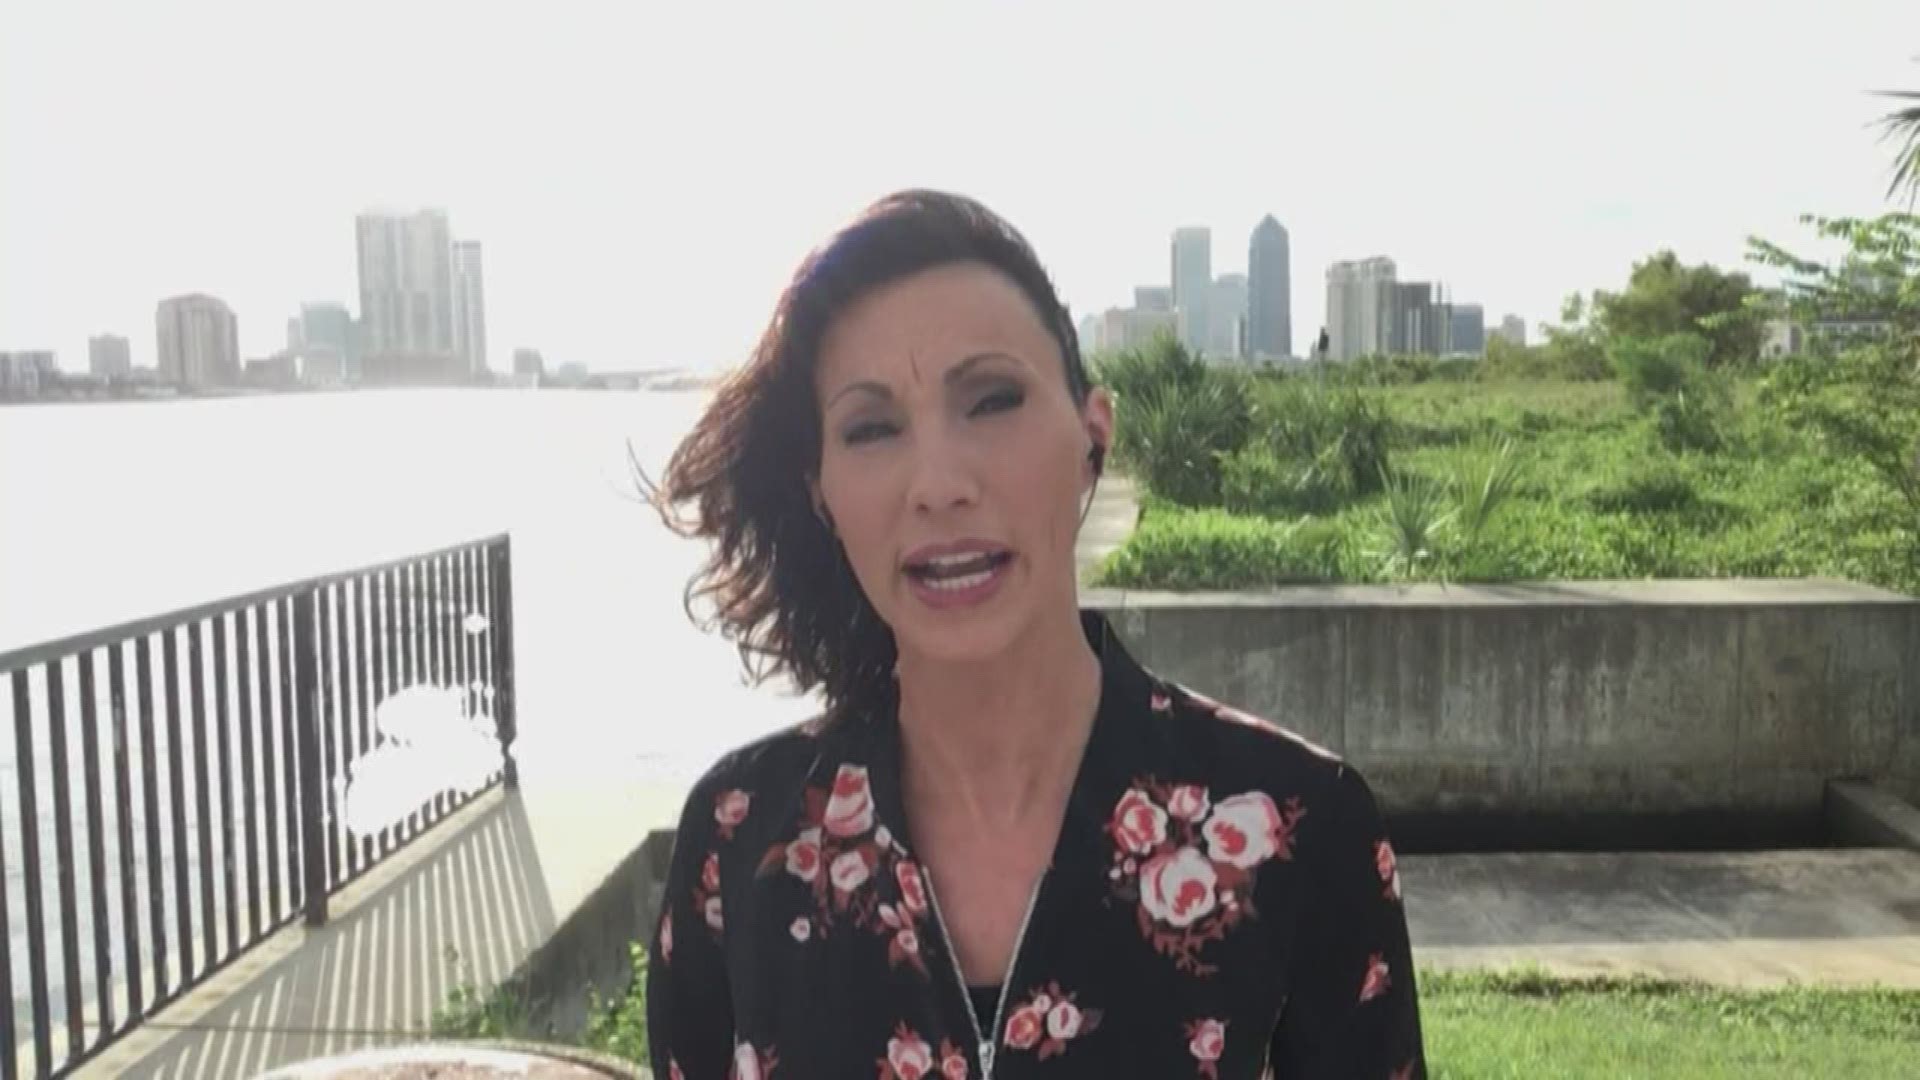 Chief Meteorologist Betsy Kling checks in from Jacksonville, Florida, where residents are suffering from 'storm fatigue' waiting for Hurricane Dorian to strike.